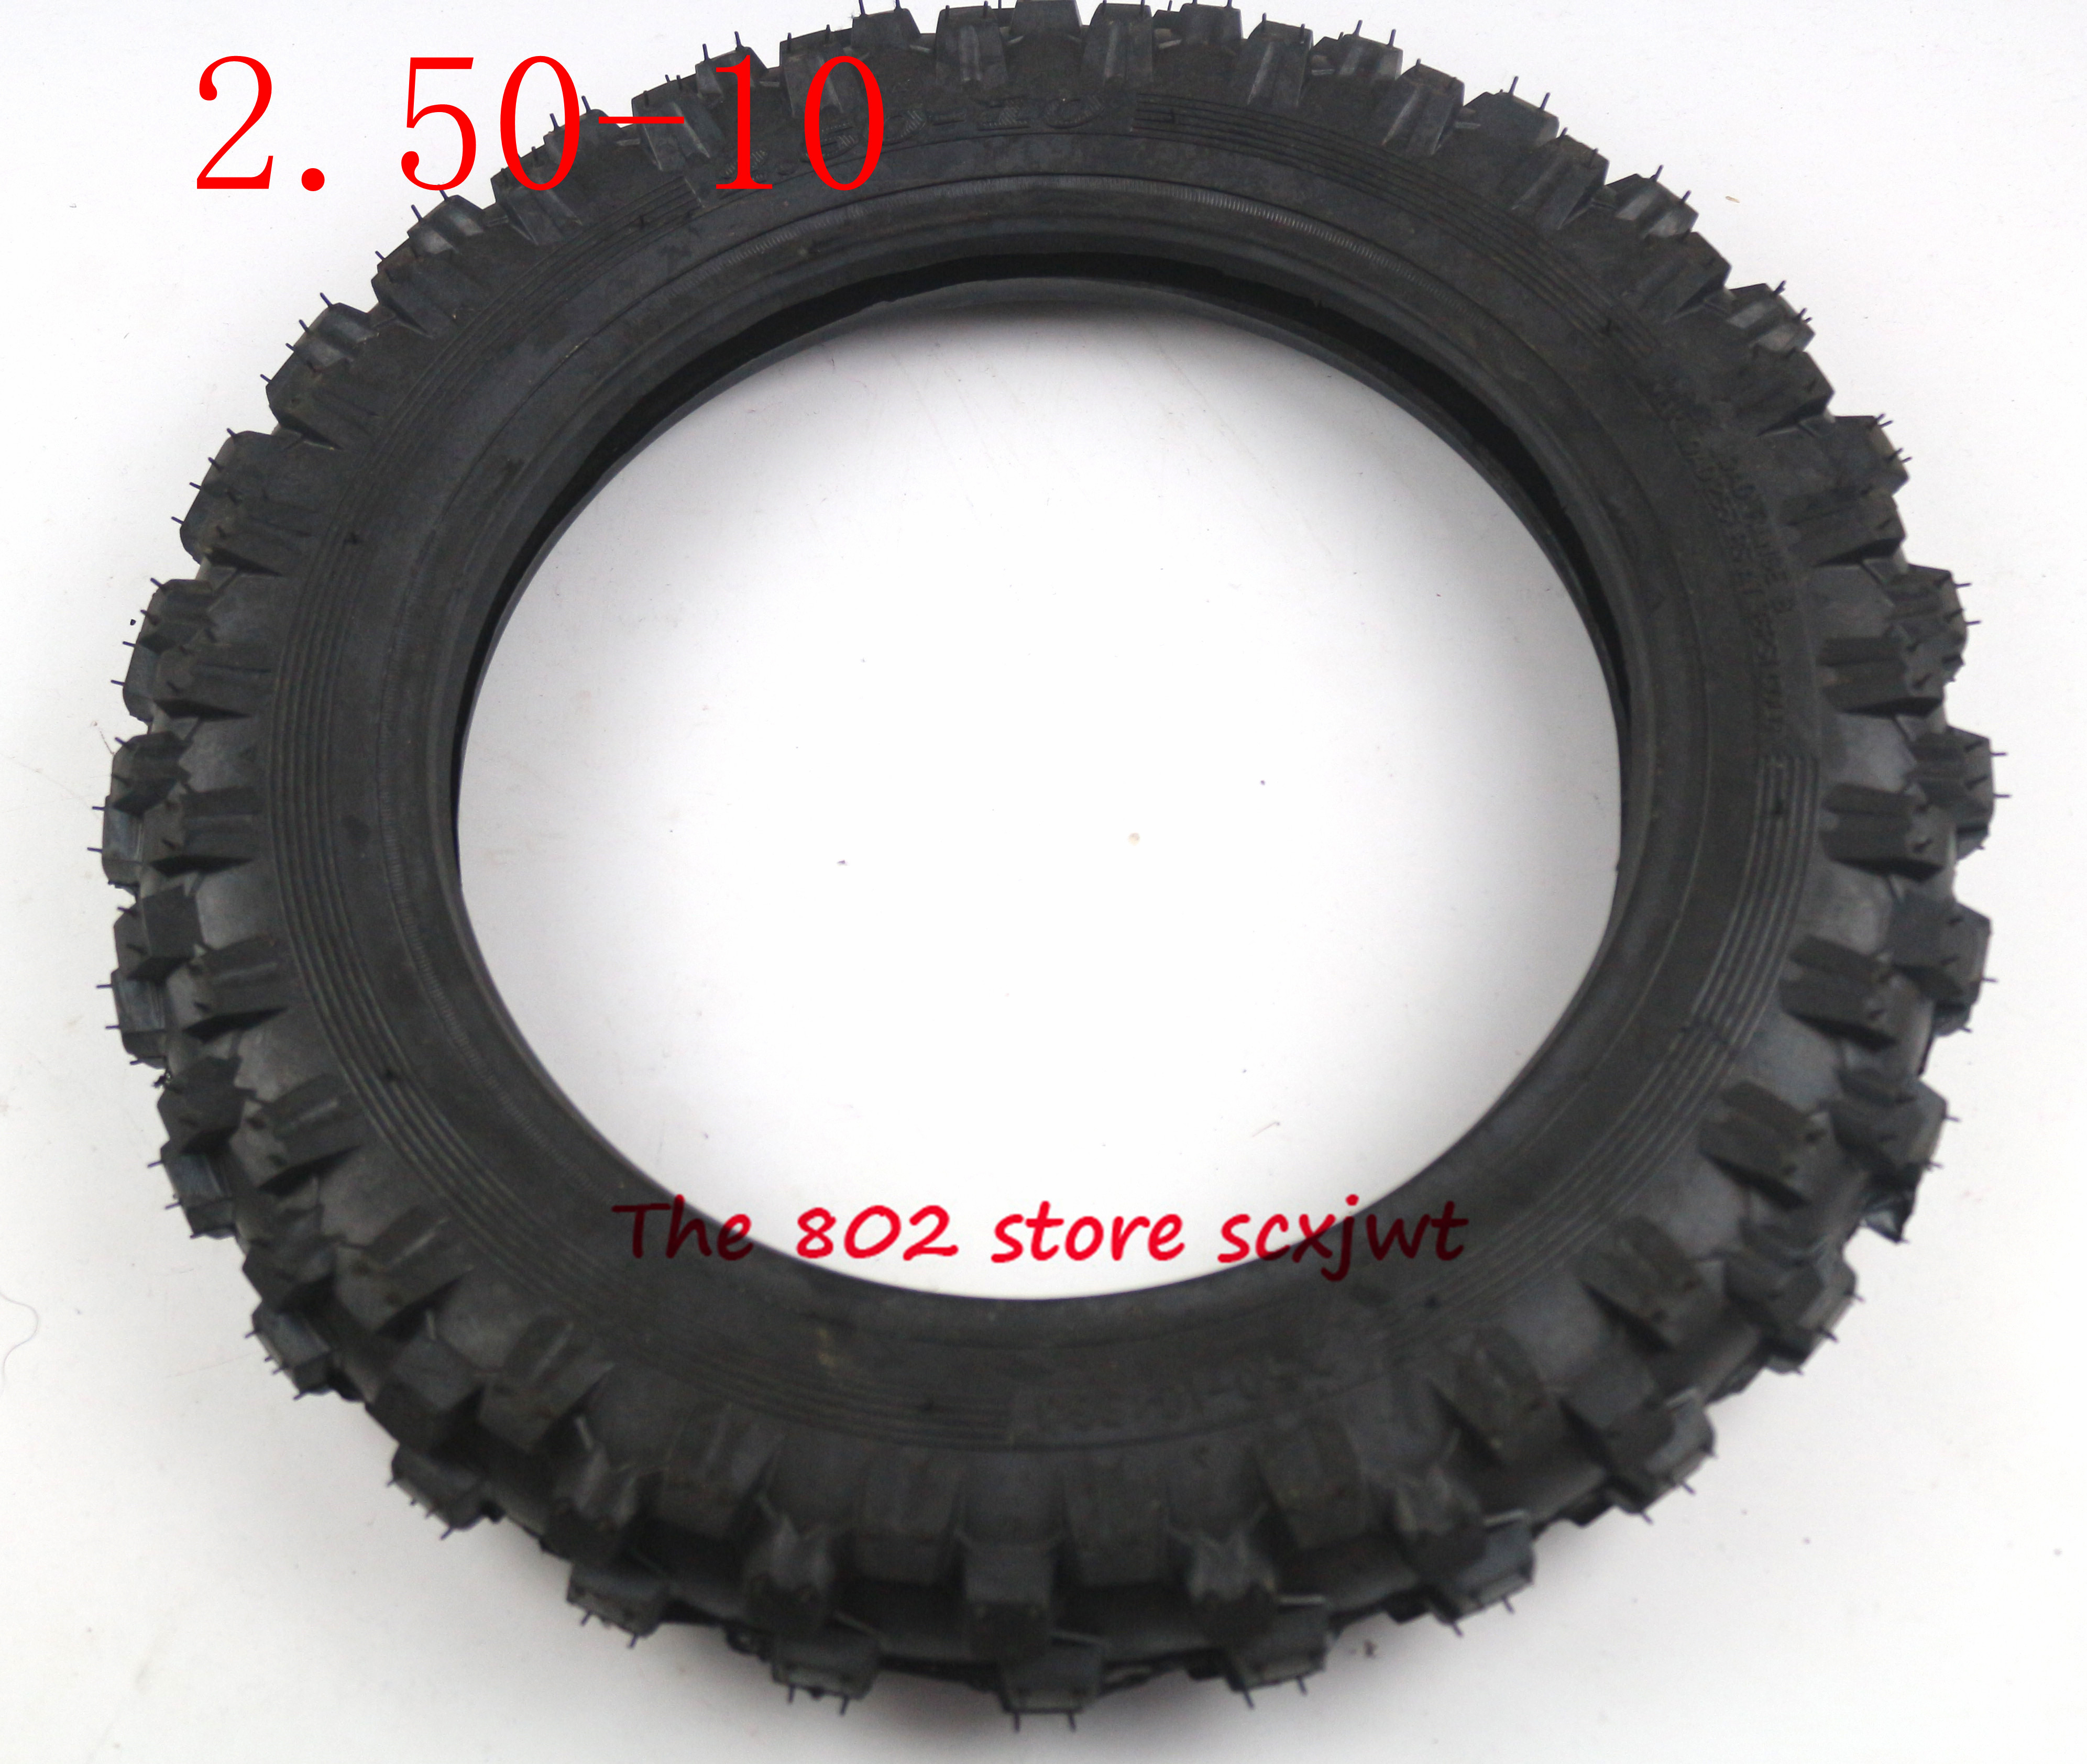 High Quality Rubber Motorcycle Tyre 2.50-10 Inner Tube Outer Trye,front and Rear Wheel ,wheel Hub